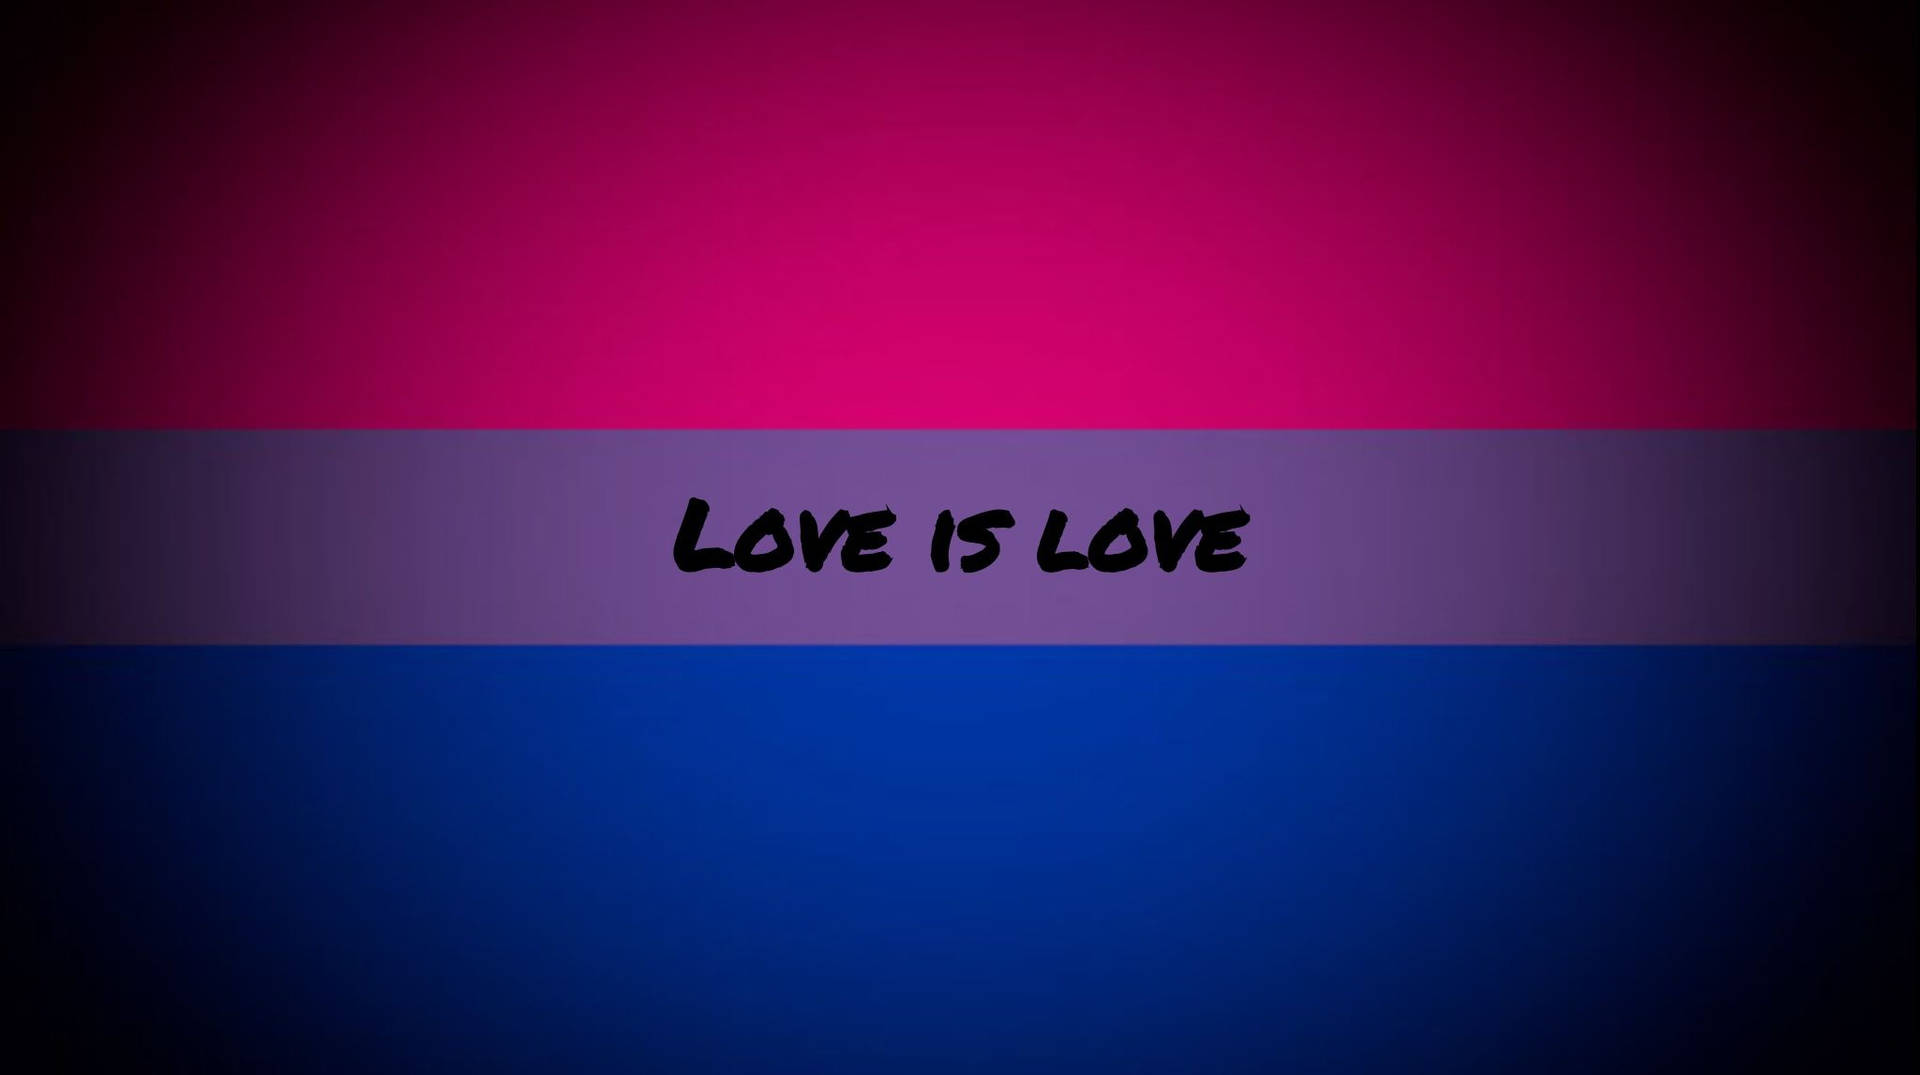 Free Bisexual Flag Wallpaper Downloads, [100+] Bisexual Flag Wallpapers for  FREE 